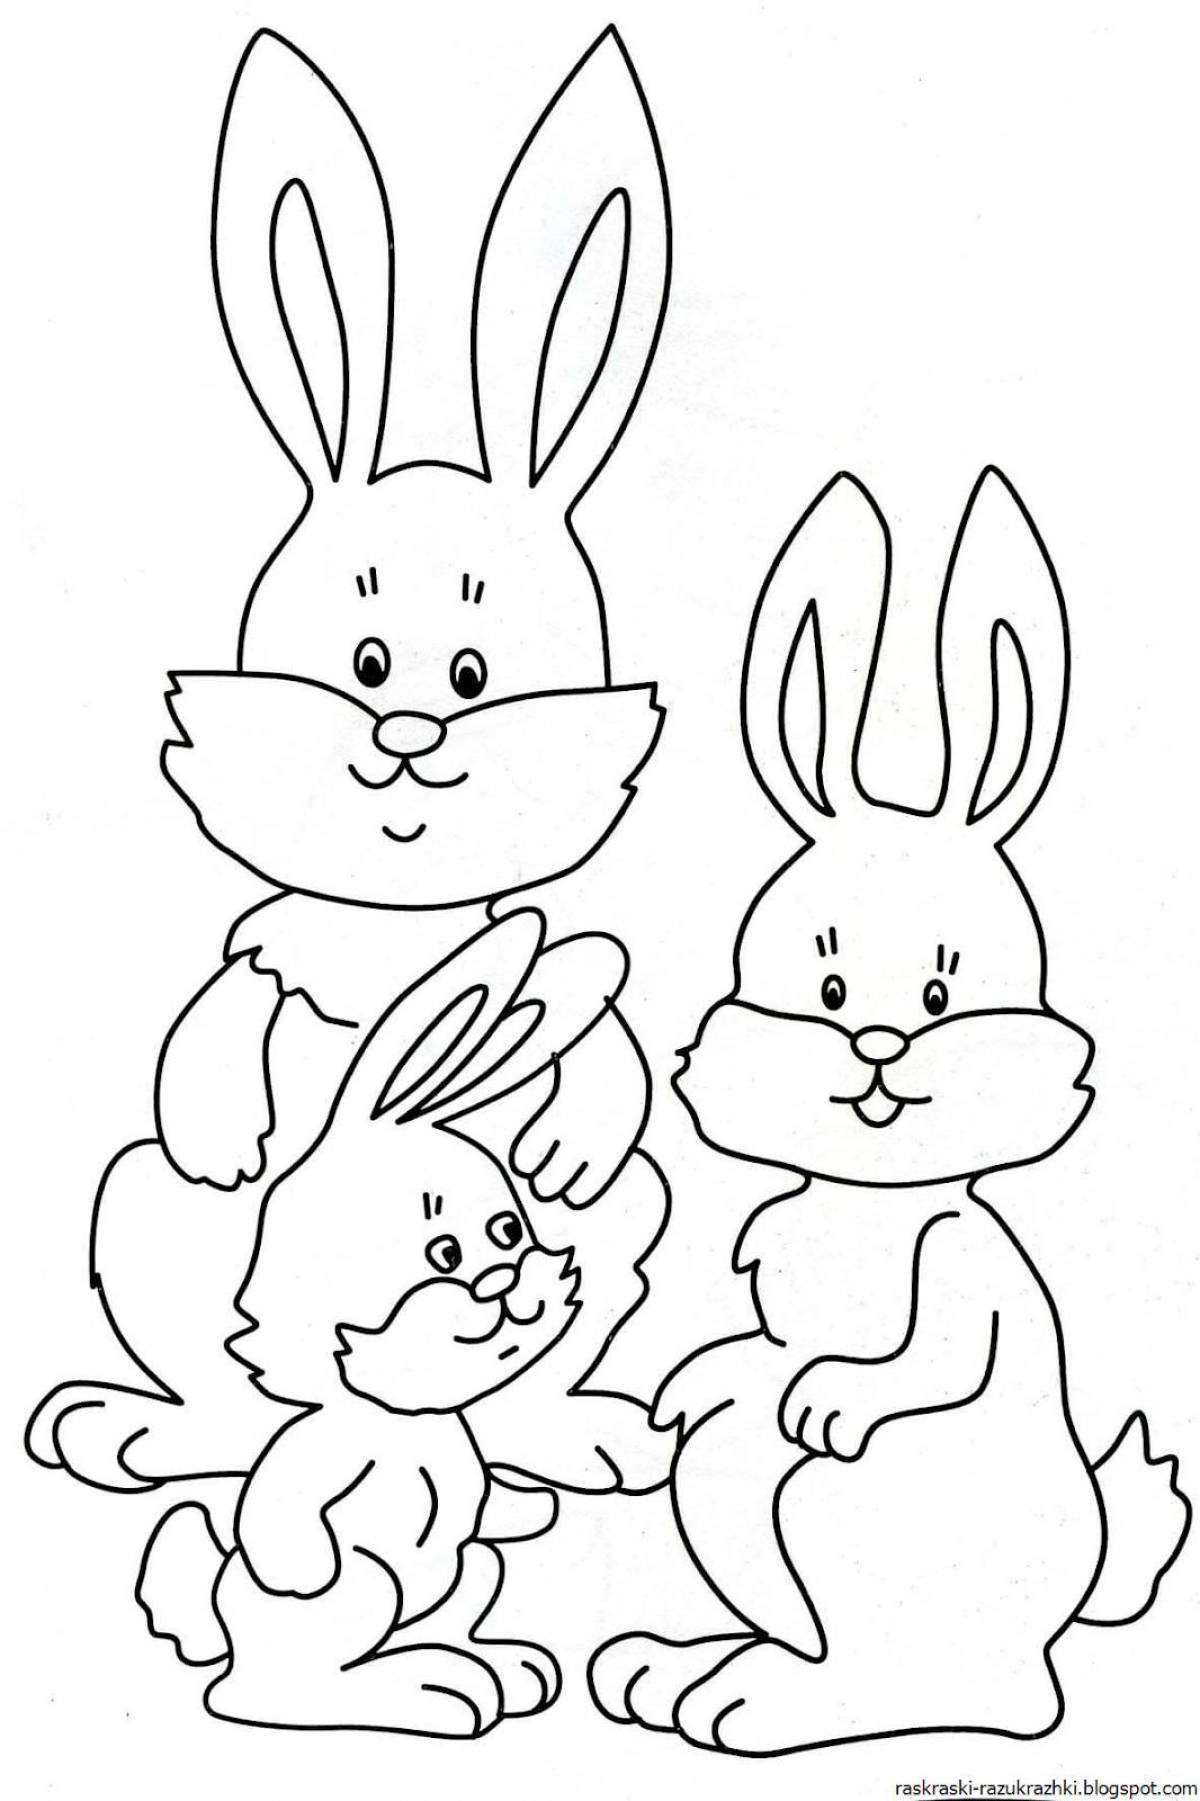 Exquisite hare coloring for kids